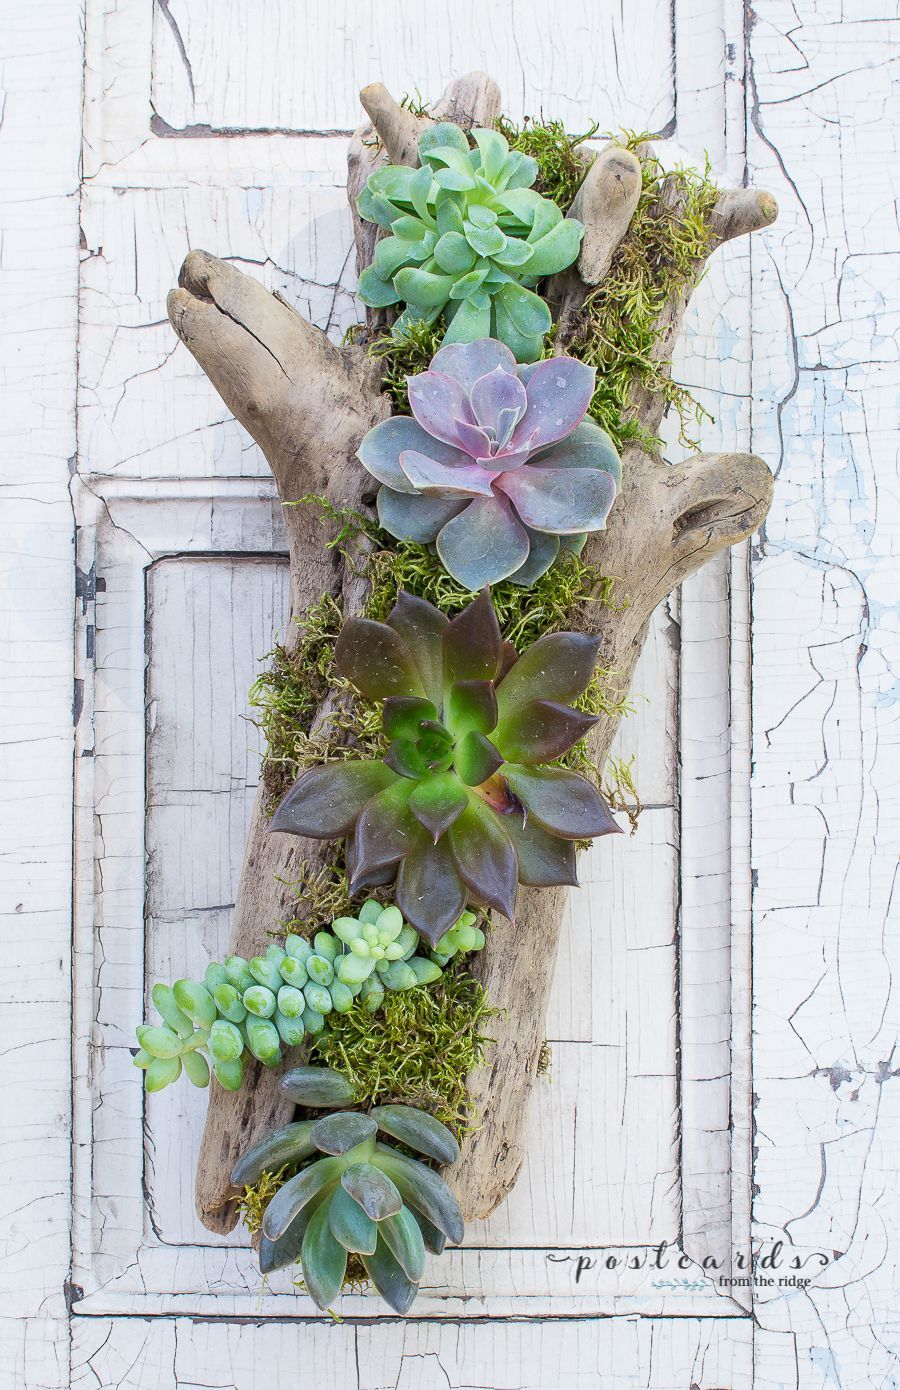 How to make a Driftwood Succulent Planter -   9 plants Succulent in driftwood ideas